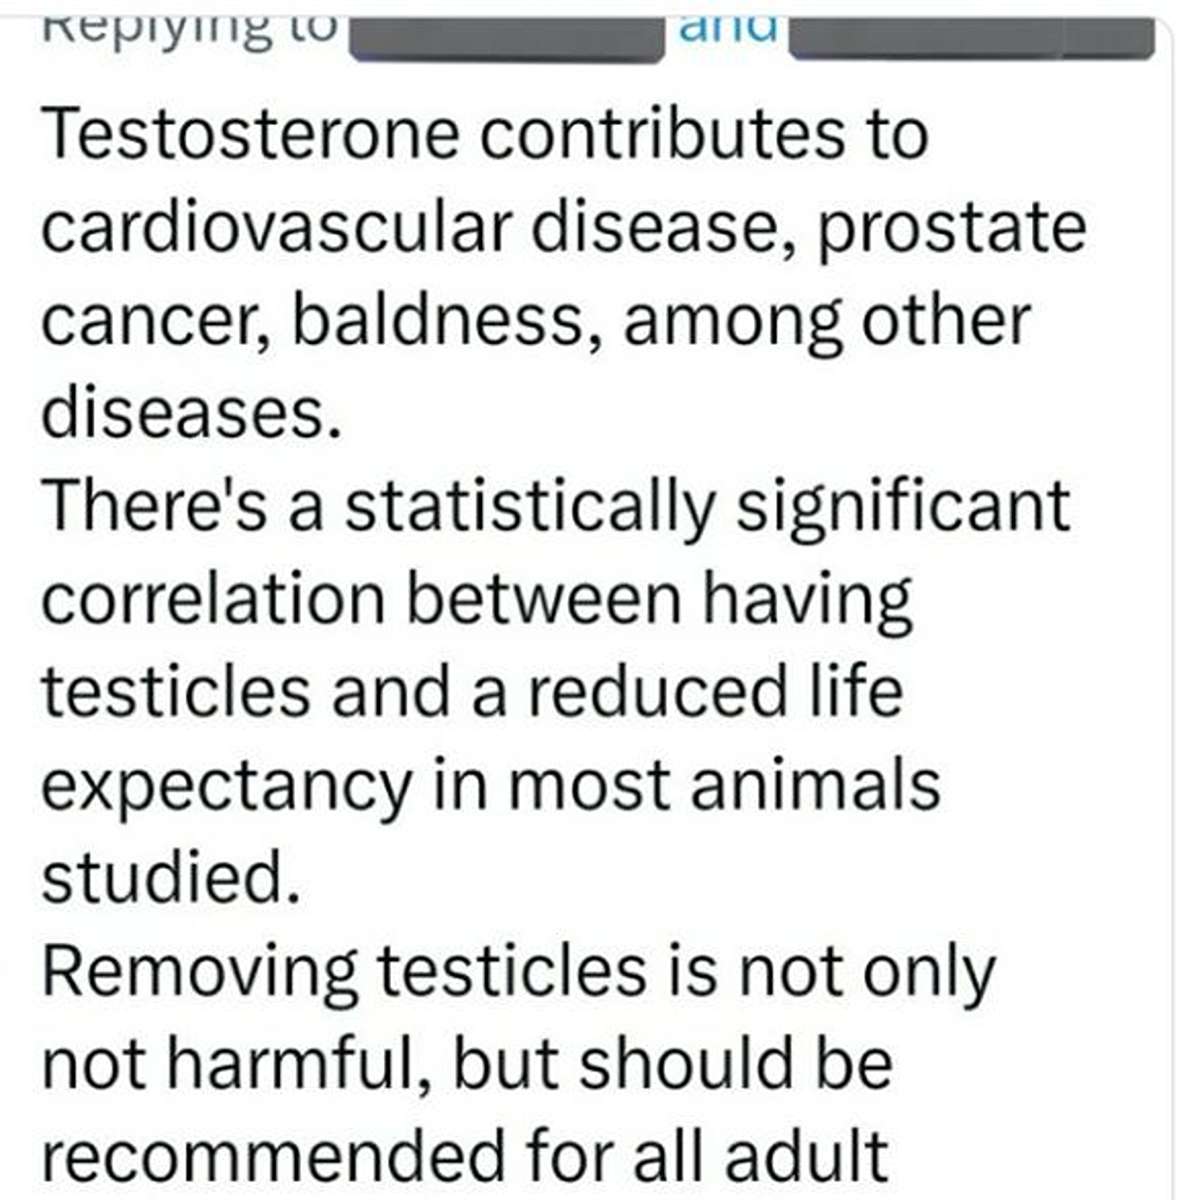 delusional people - quotes about boys - Testosterone contributes to cardiovascular disease, prostate cancer, baldness, among other diseases. There's a statistically significant correlation between having testicles and a reduced life expectancy in most ani